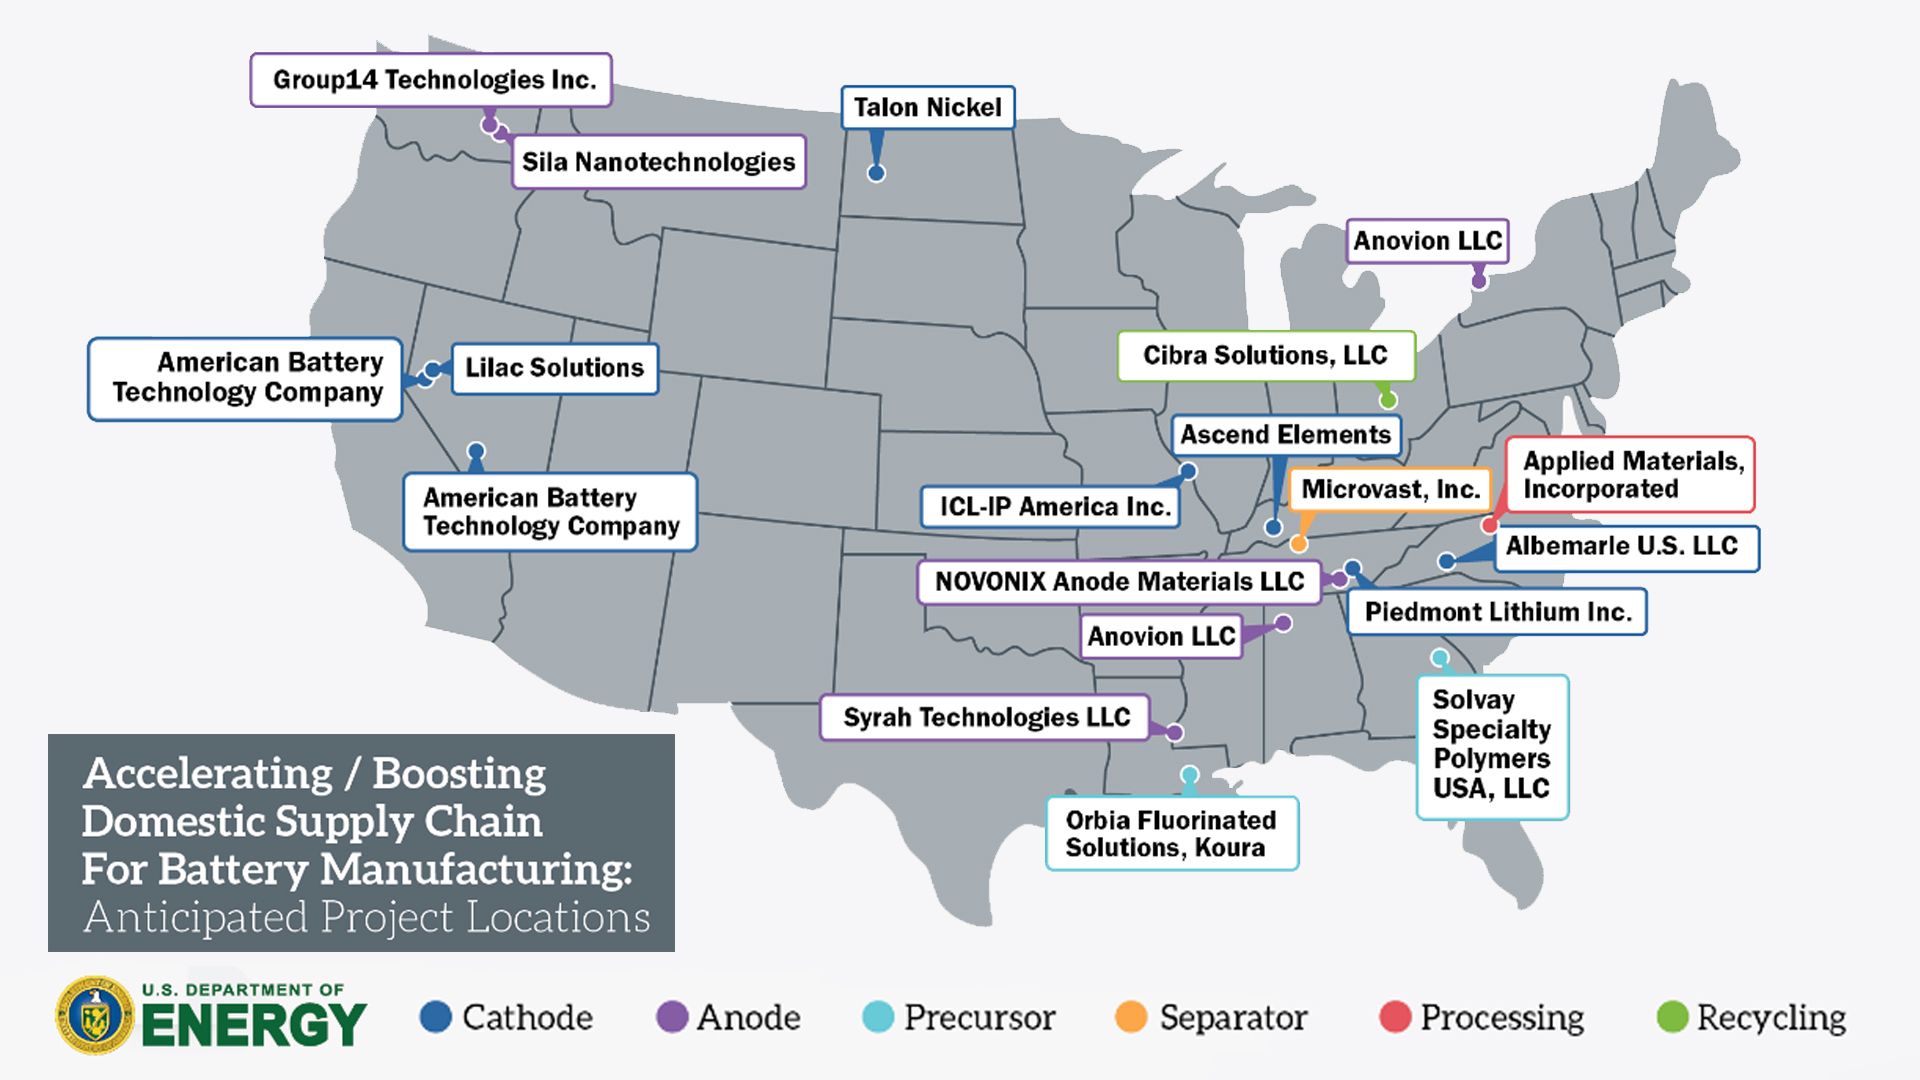 A map of the United States showing the locations and names of companies that won federal funding to improve the EV industry